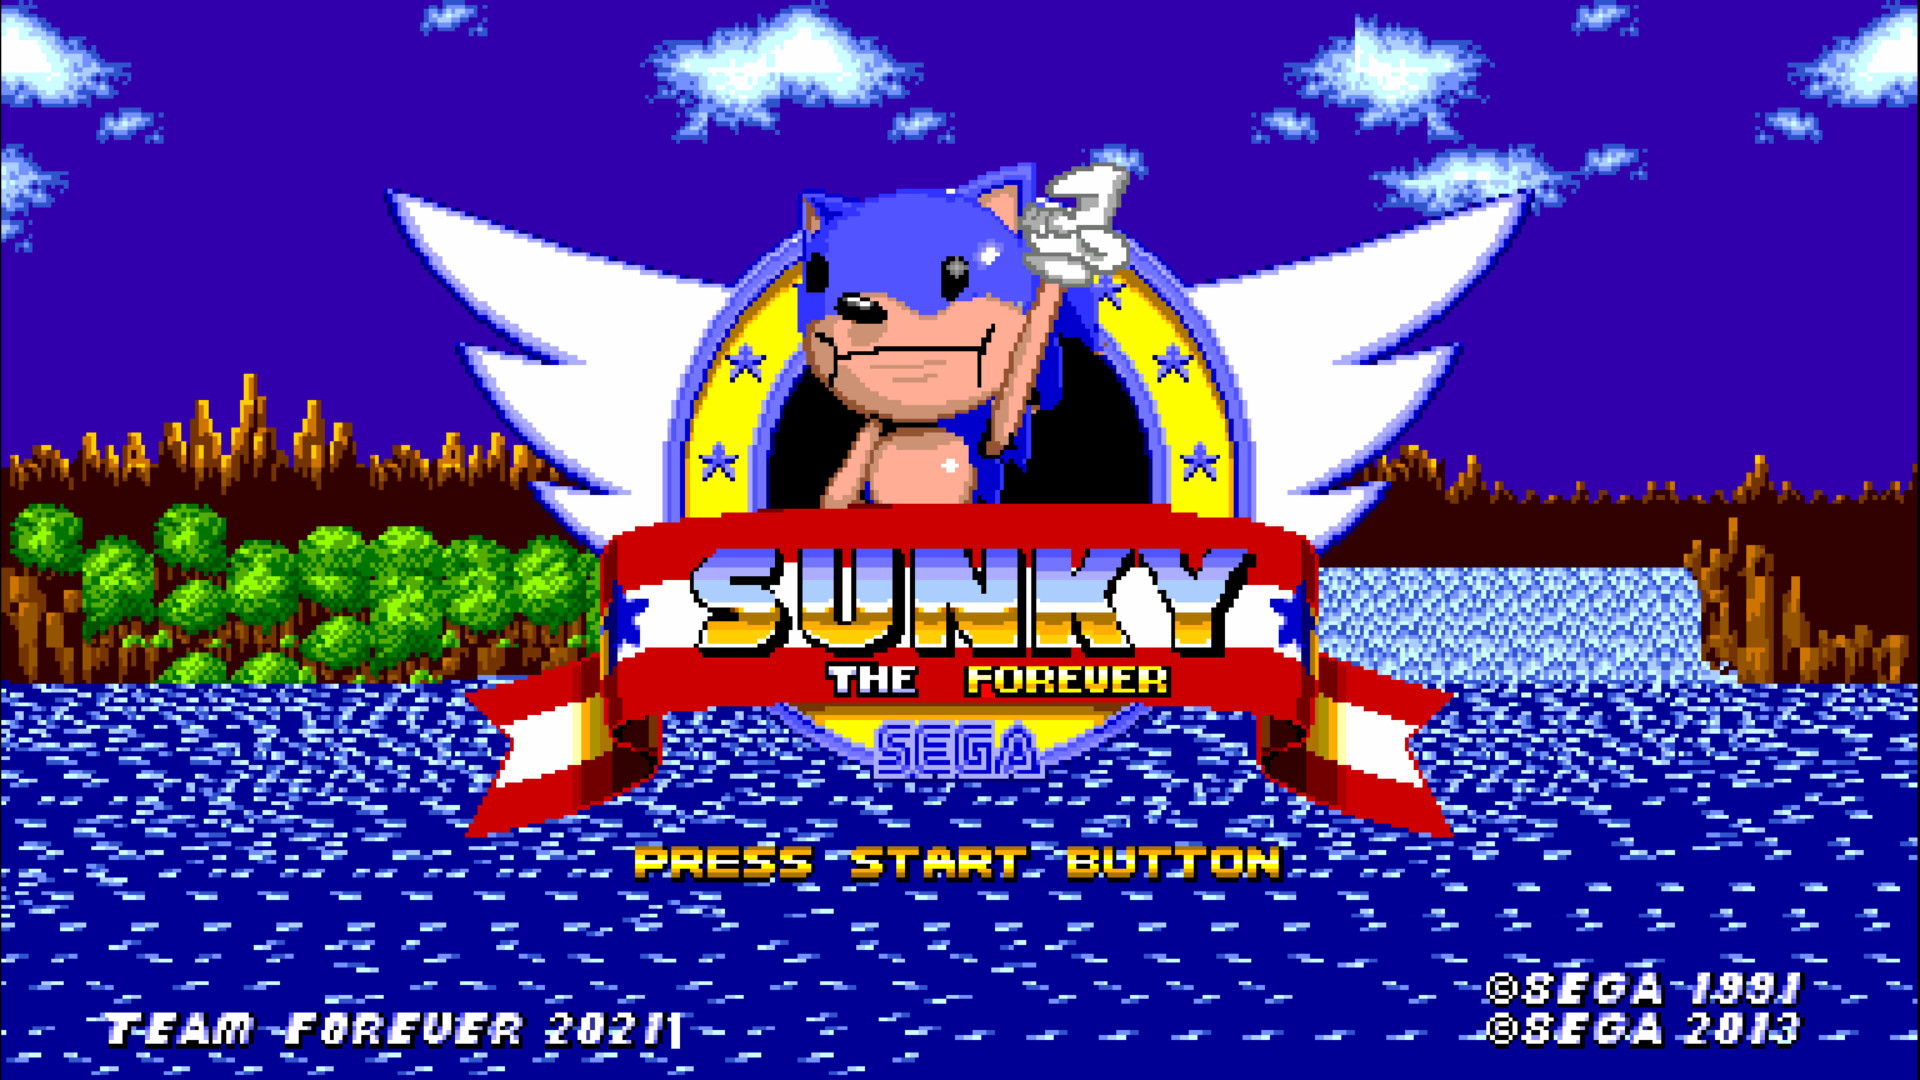 THE ULTIMATE SUNKY COLLECTION WITH EVERY SINGLE SUNKY GAME EVER :  r/SonicTheHedgehog